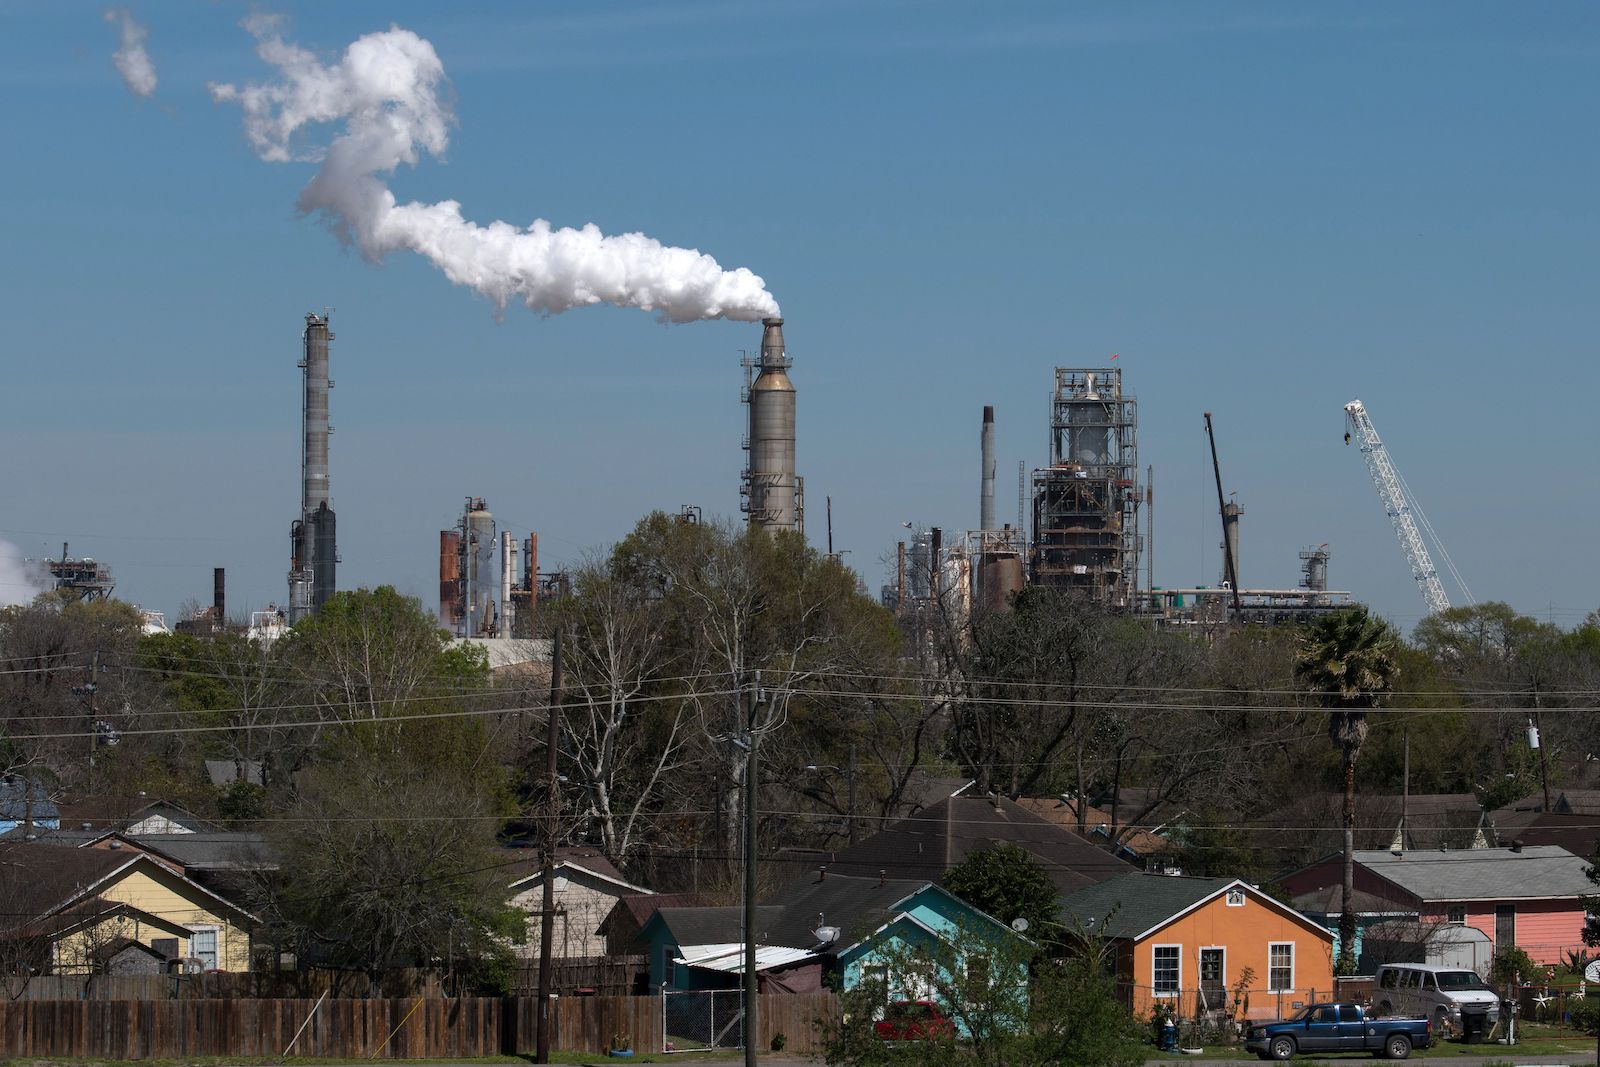 EPA paving the way for industry pollution